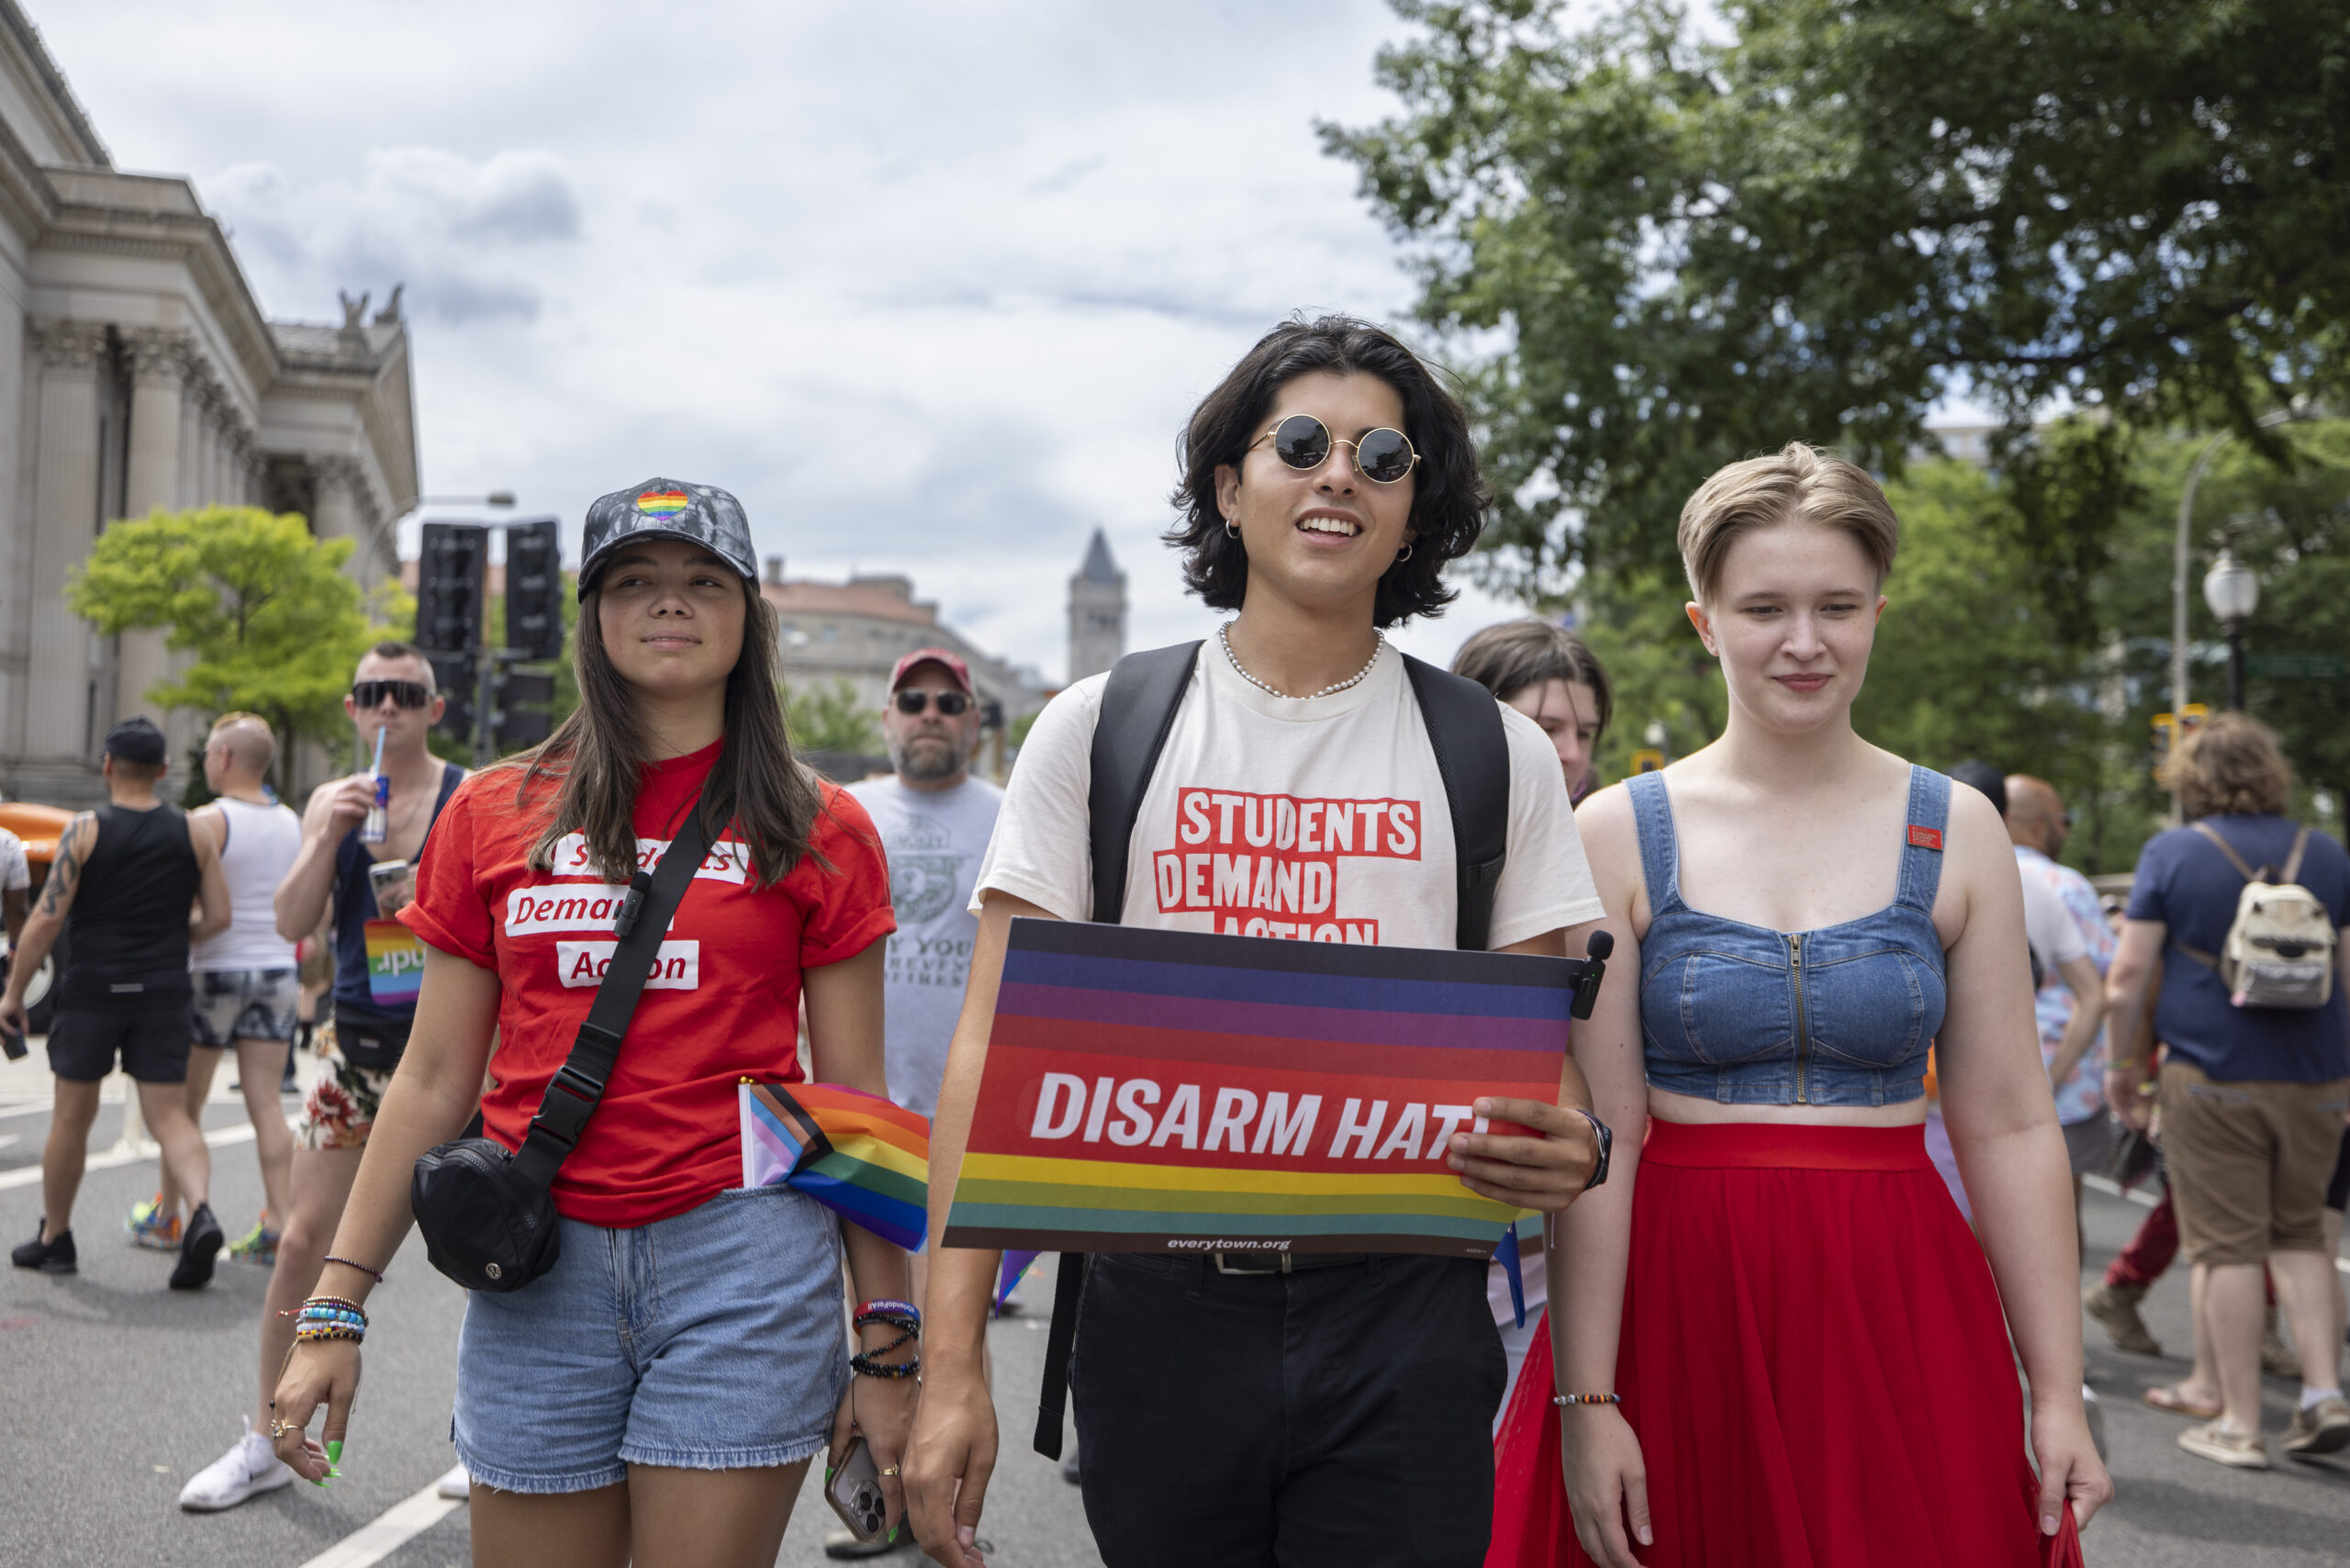 Andres Cubillos is in the center of the photo, marching in a DC Pride parade. He has curly dark hair cut to just above his shoulders and is wearing black round sunglasses. He wears an off-white t-shirt with Students Demand Action printed in all-caps in red/orange text. He holds a Disarm Hate sign (rainbow print background, with white text) in his left hand.